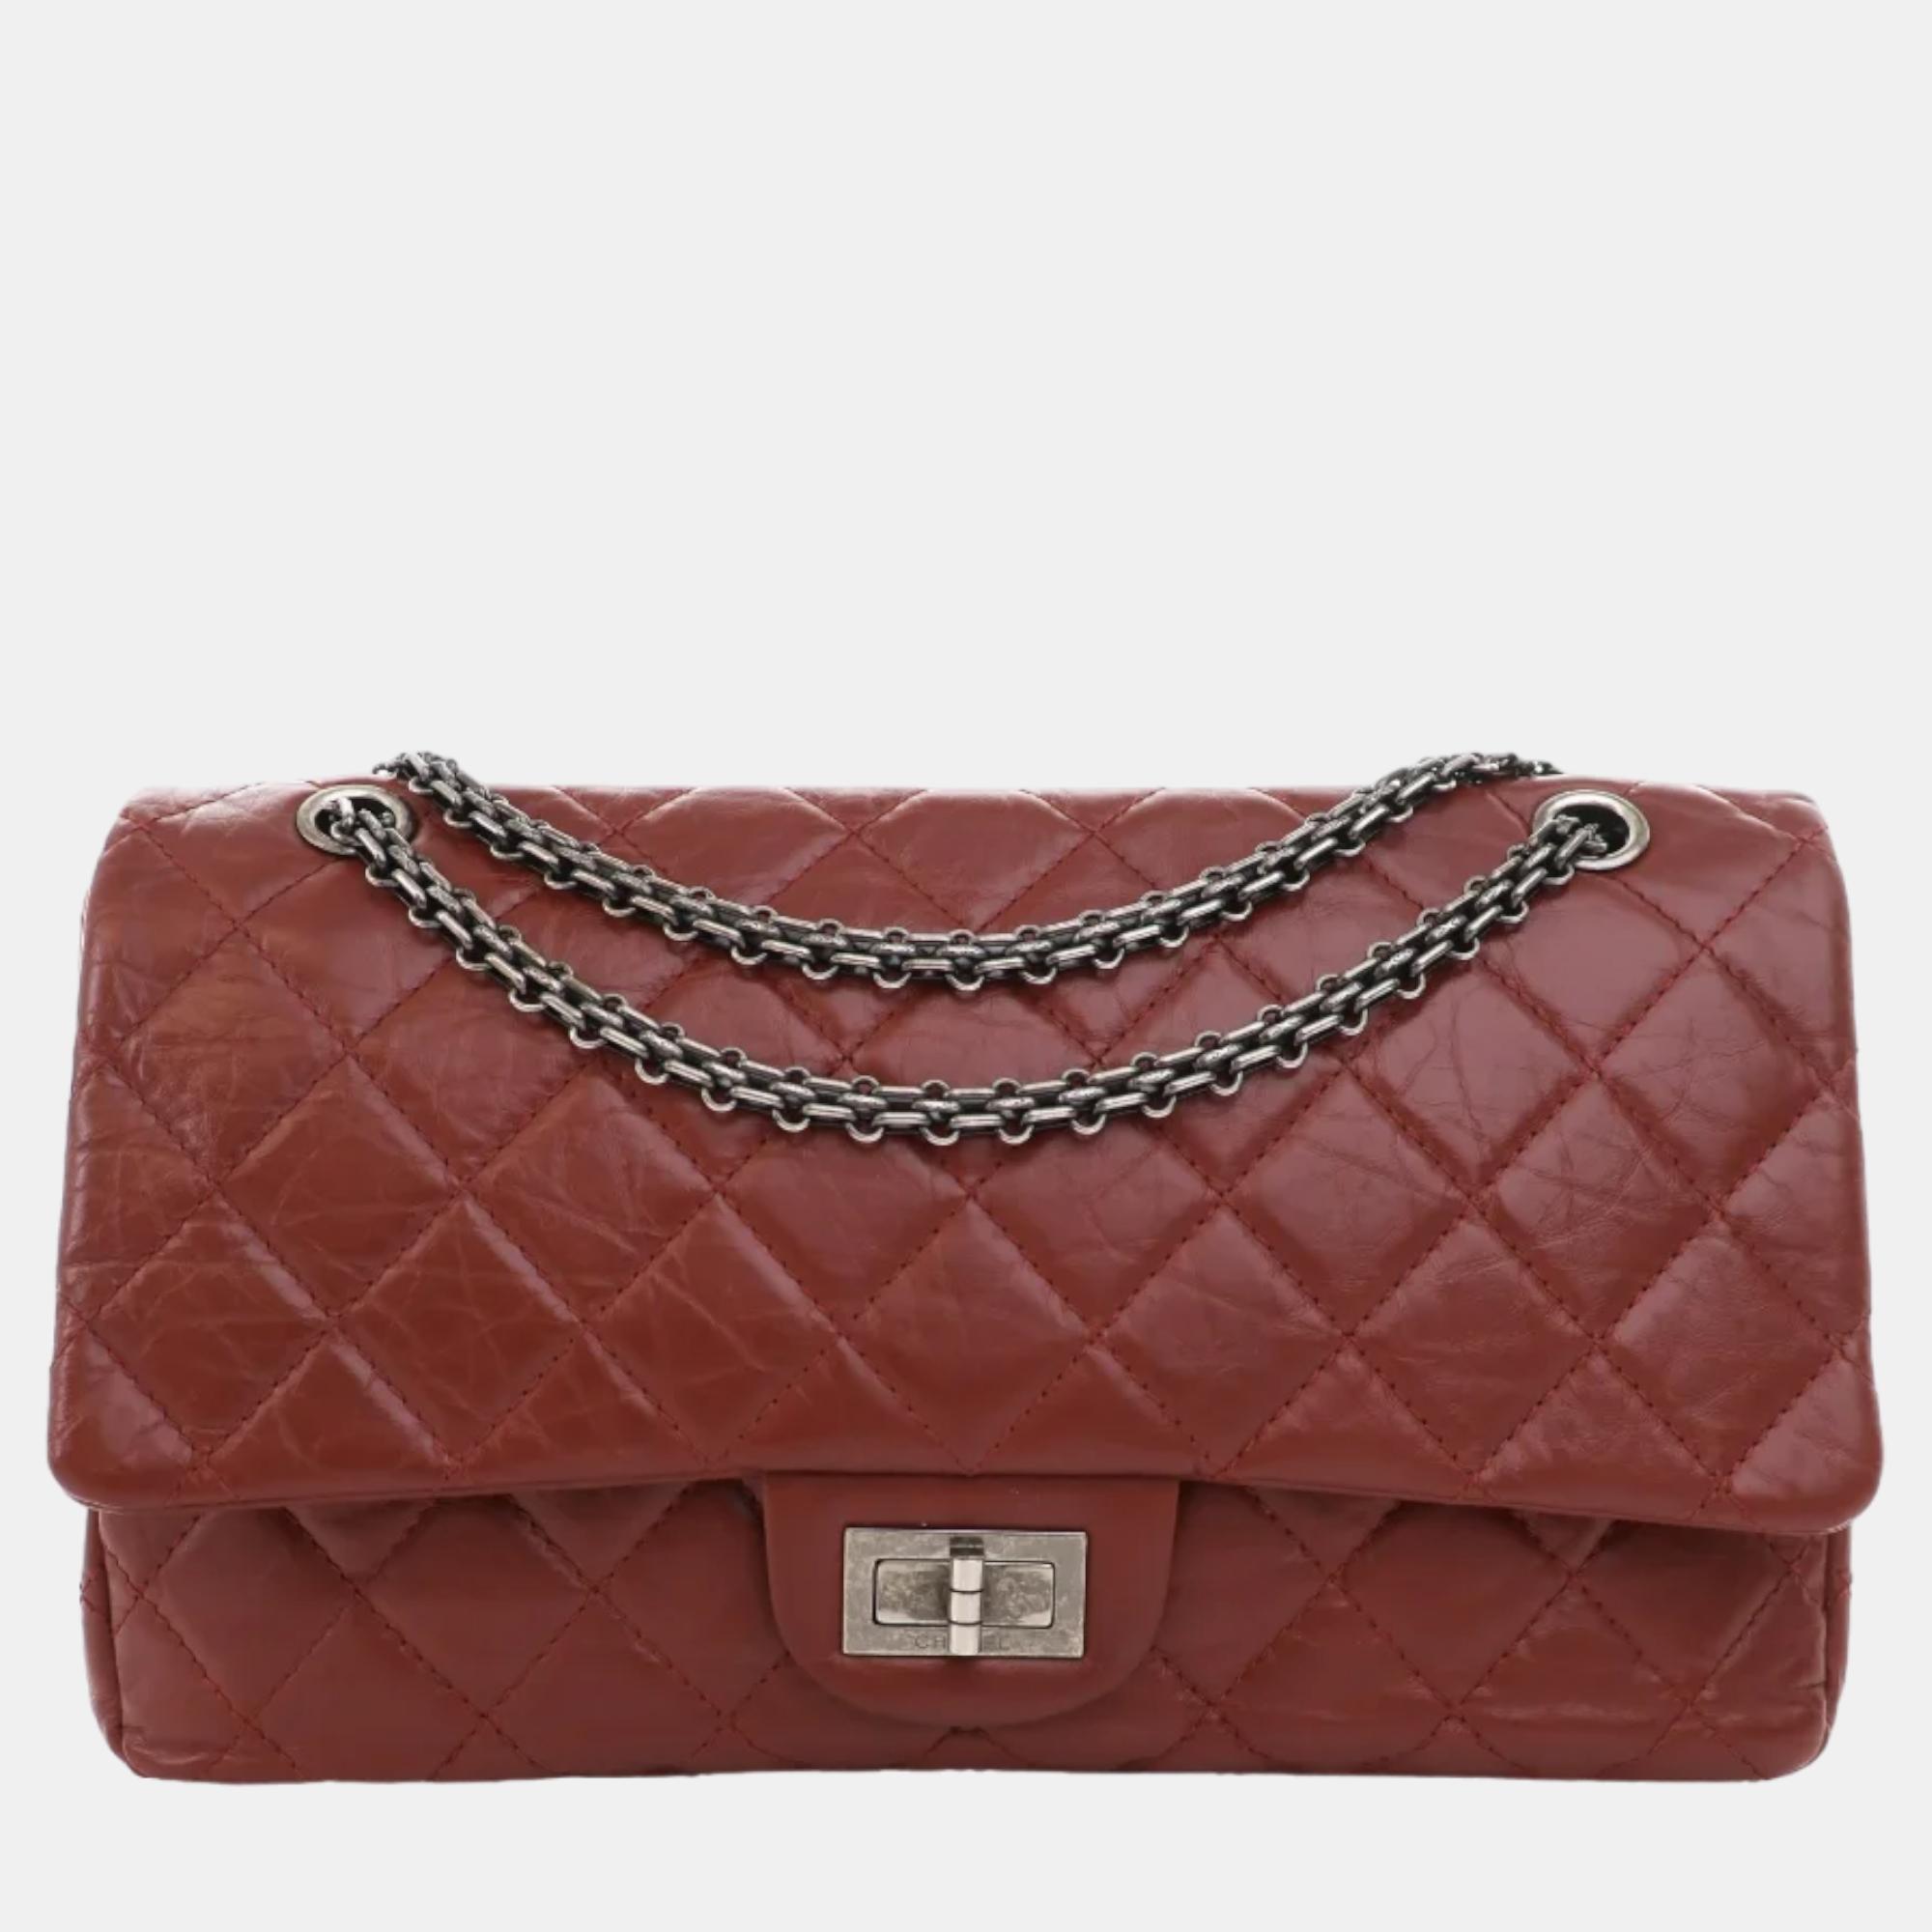 Chanel red leather 227 medium reissue double flap reissue shoulder bag